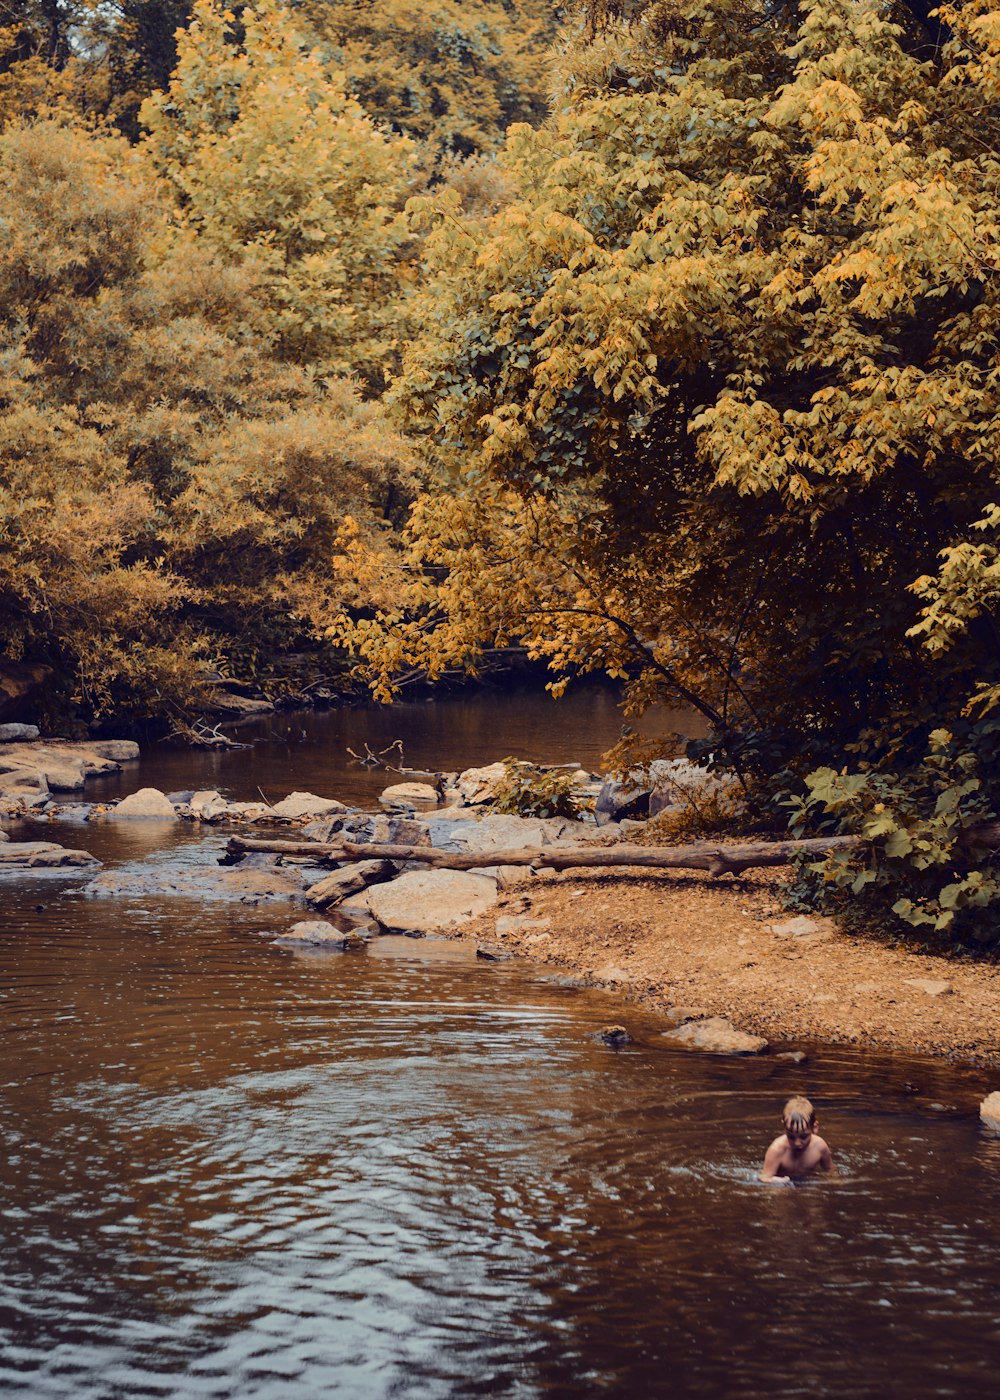 a man wading in a river surrounded by trees